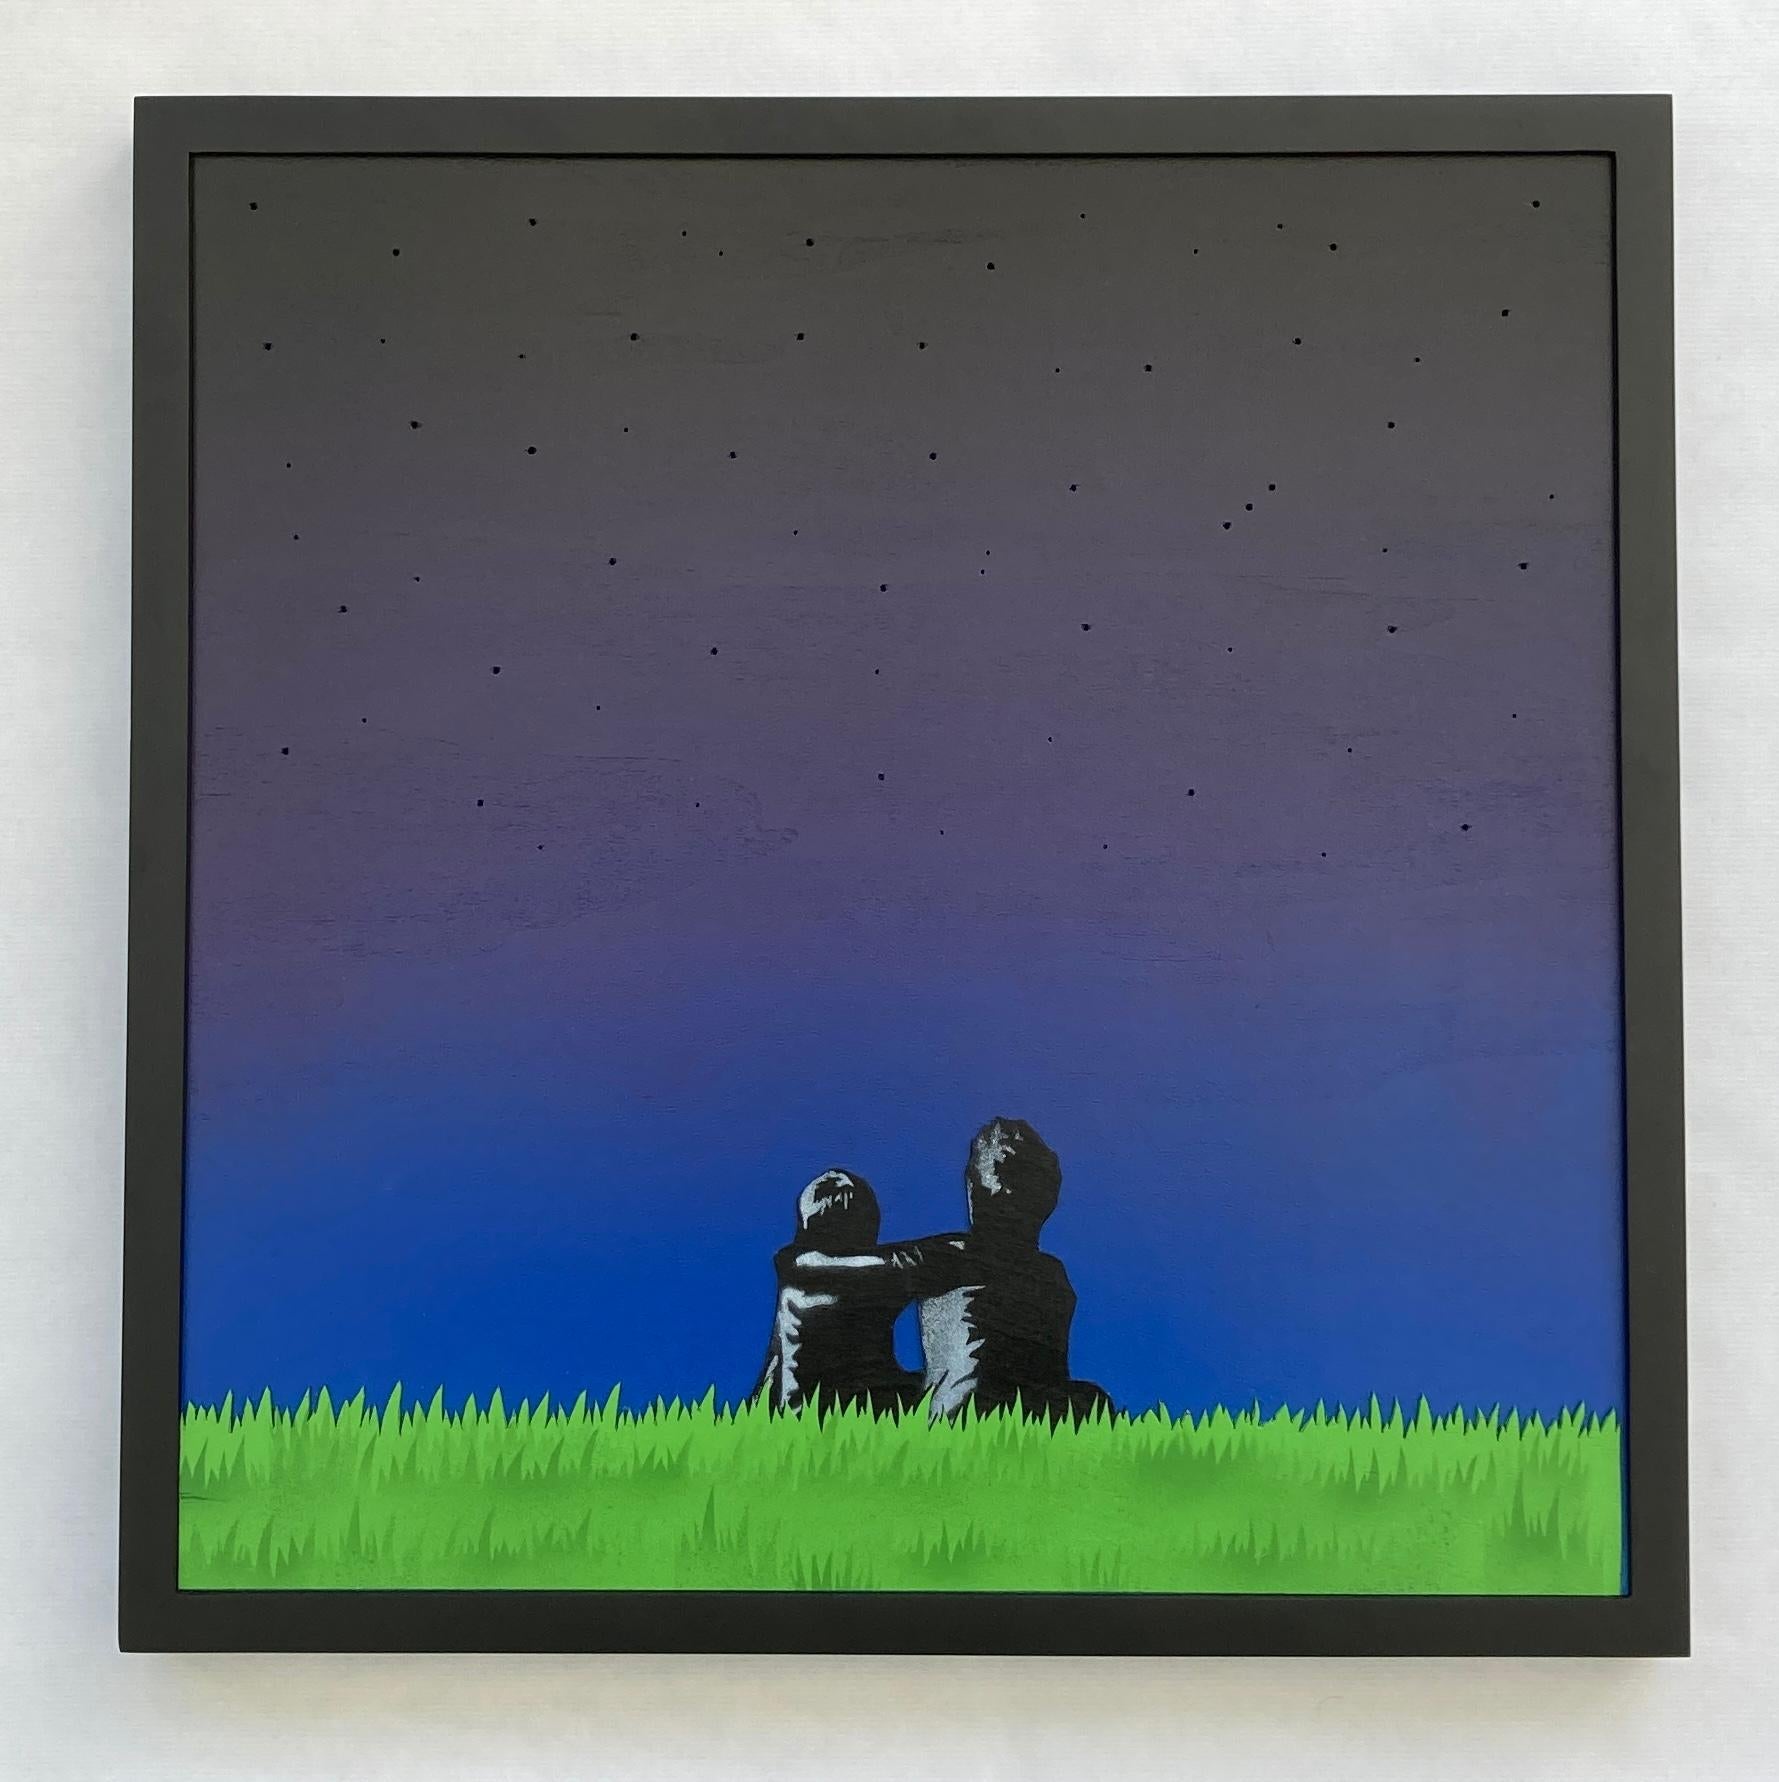 Edition version – 3D wood hand-cut grassy foreground with light up the night sky

Surface – customized light-up wood panel in frame with hand-cut 3D wood foreground.

Edition size – 5x 12x12” 

Size – small edition: panel -12x12” (framed 13x13”)